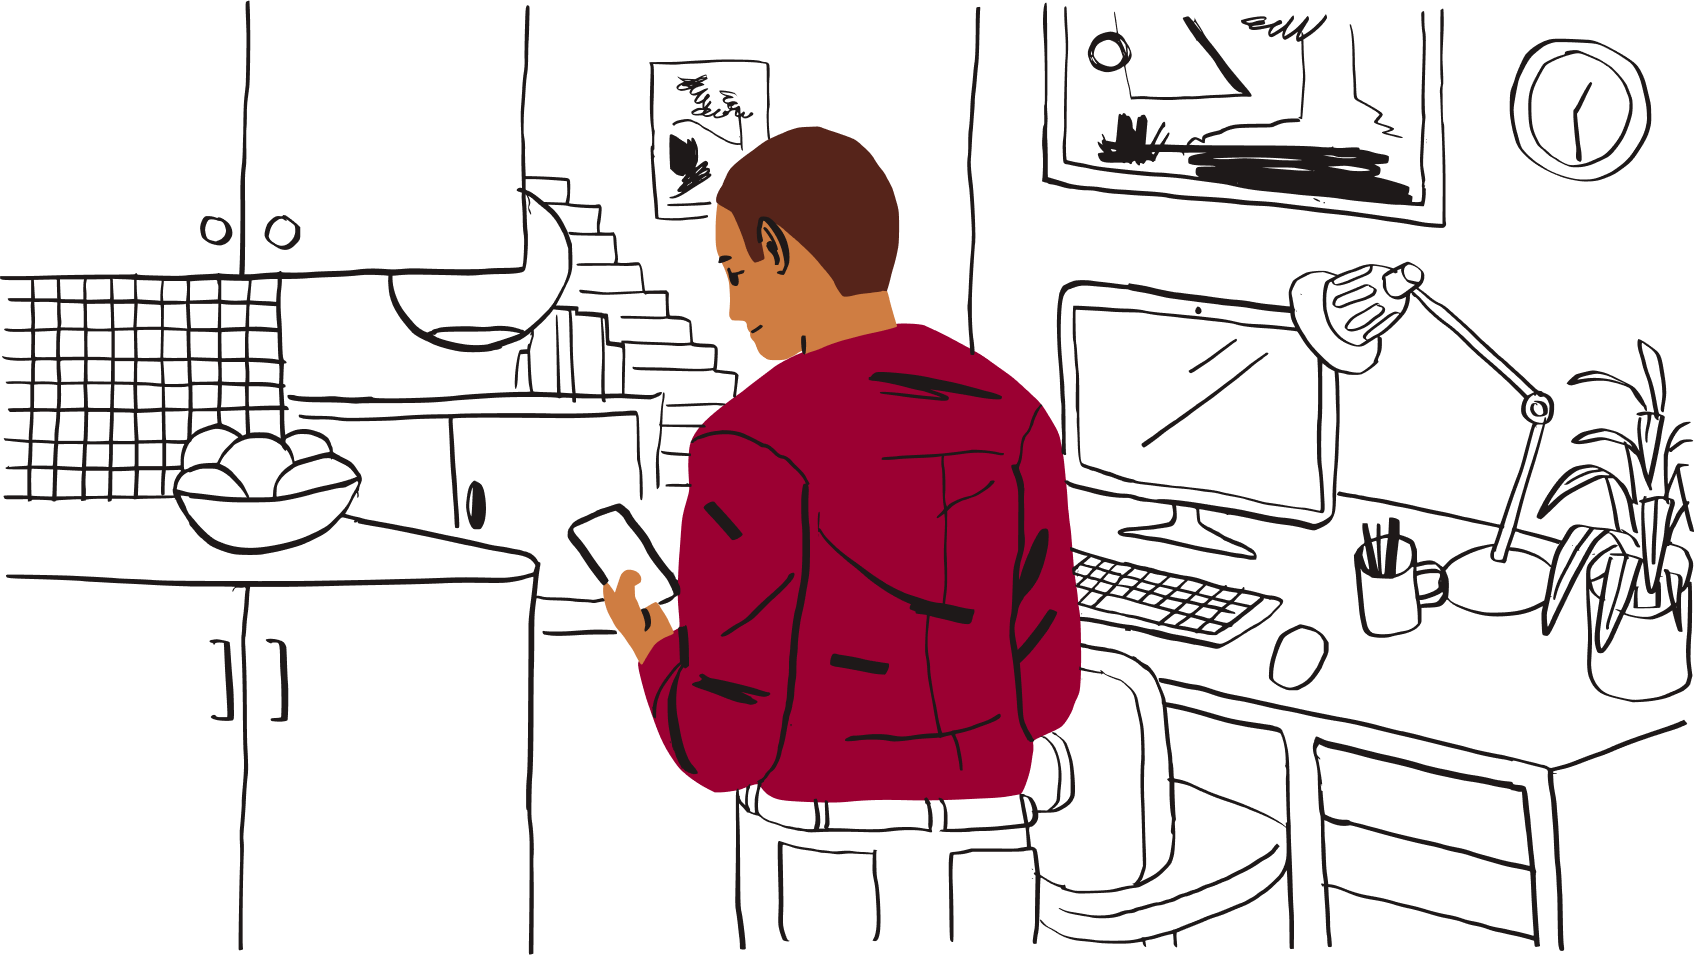 An illustration of a person with multiple devices checking their phone, they look reassured.